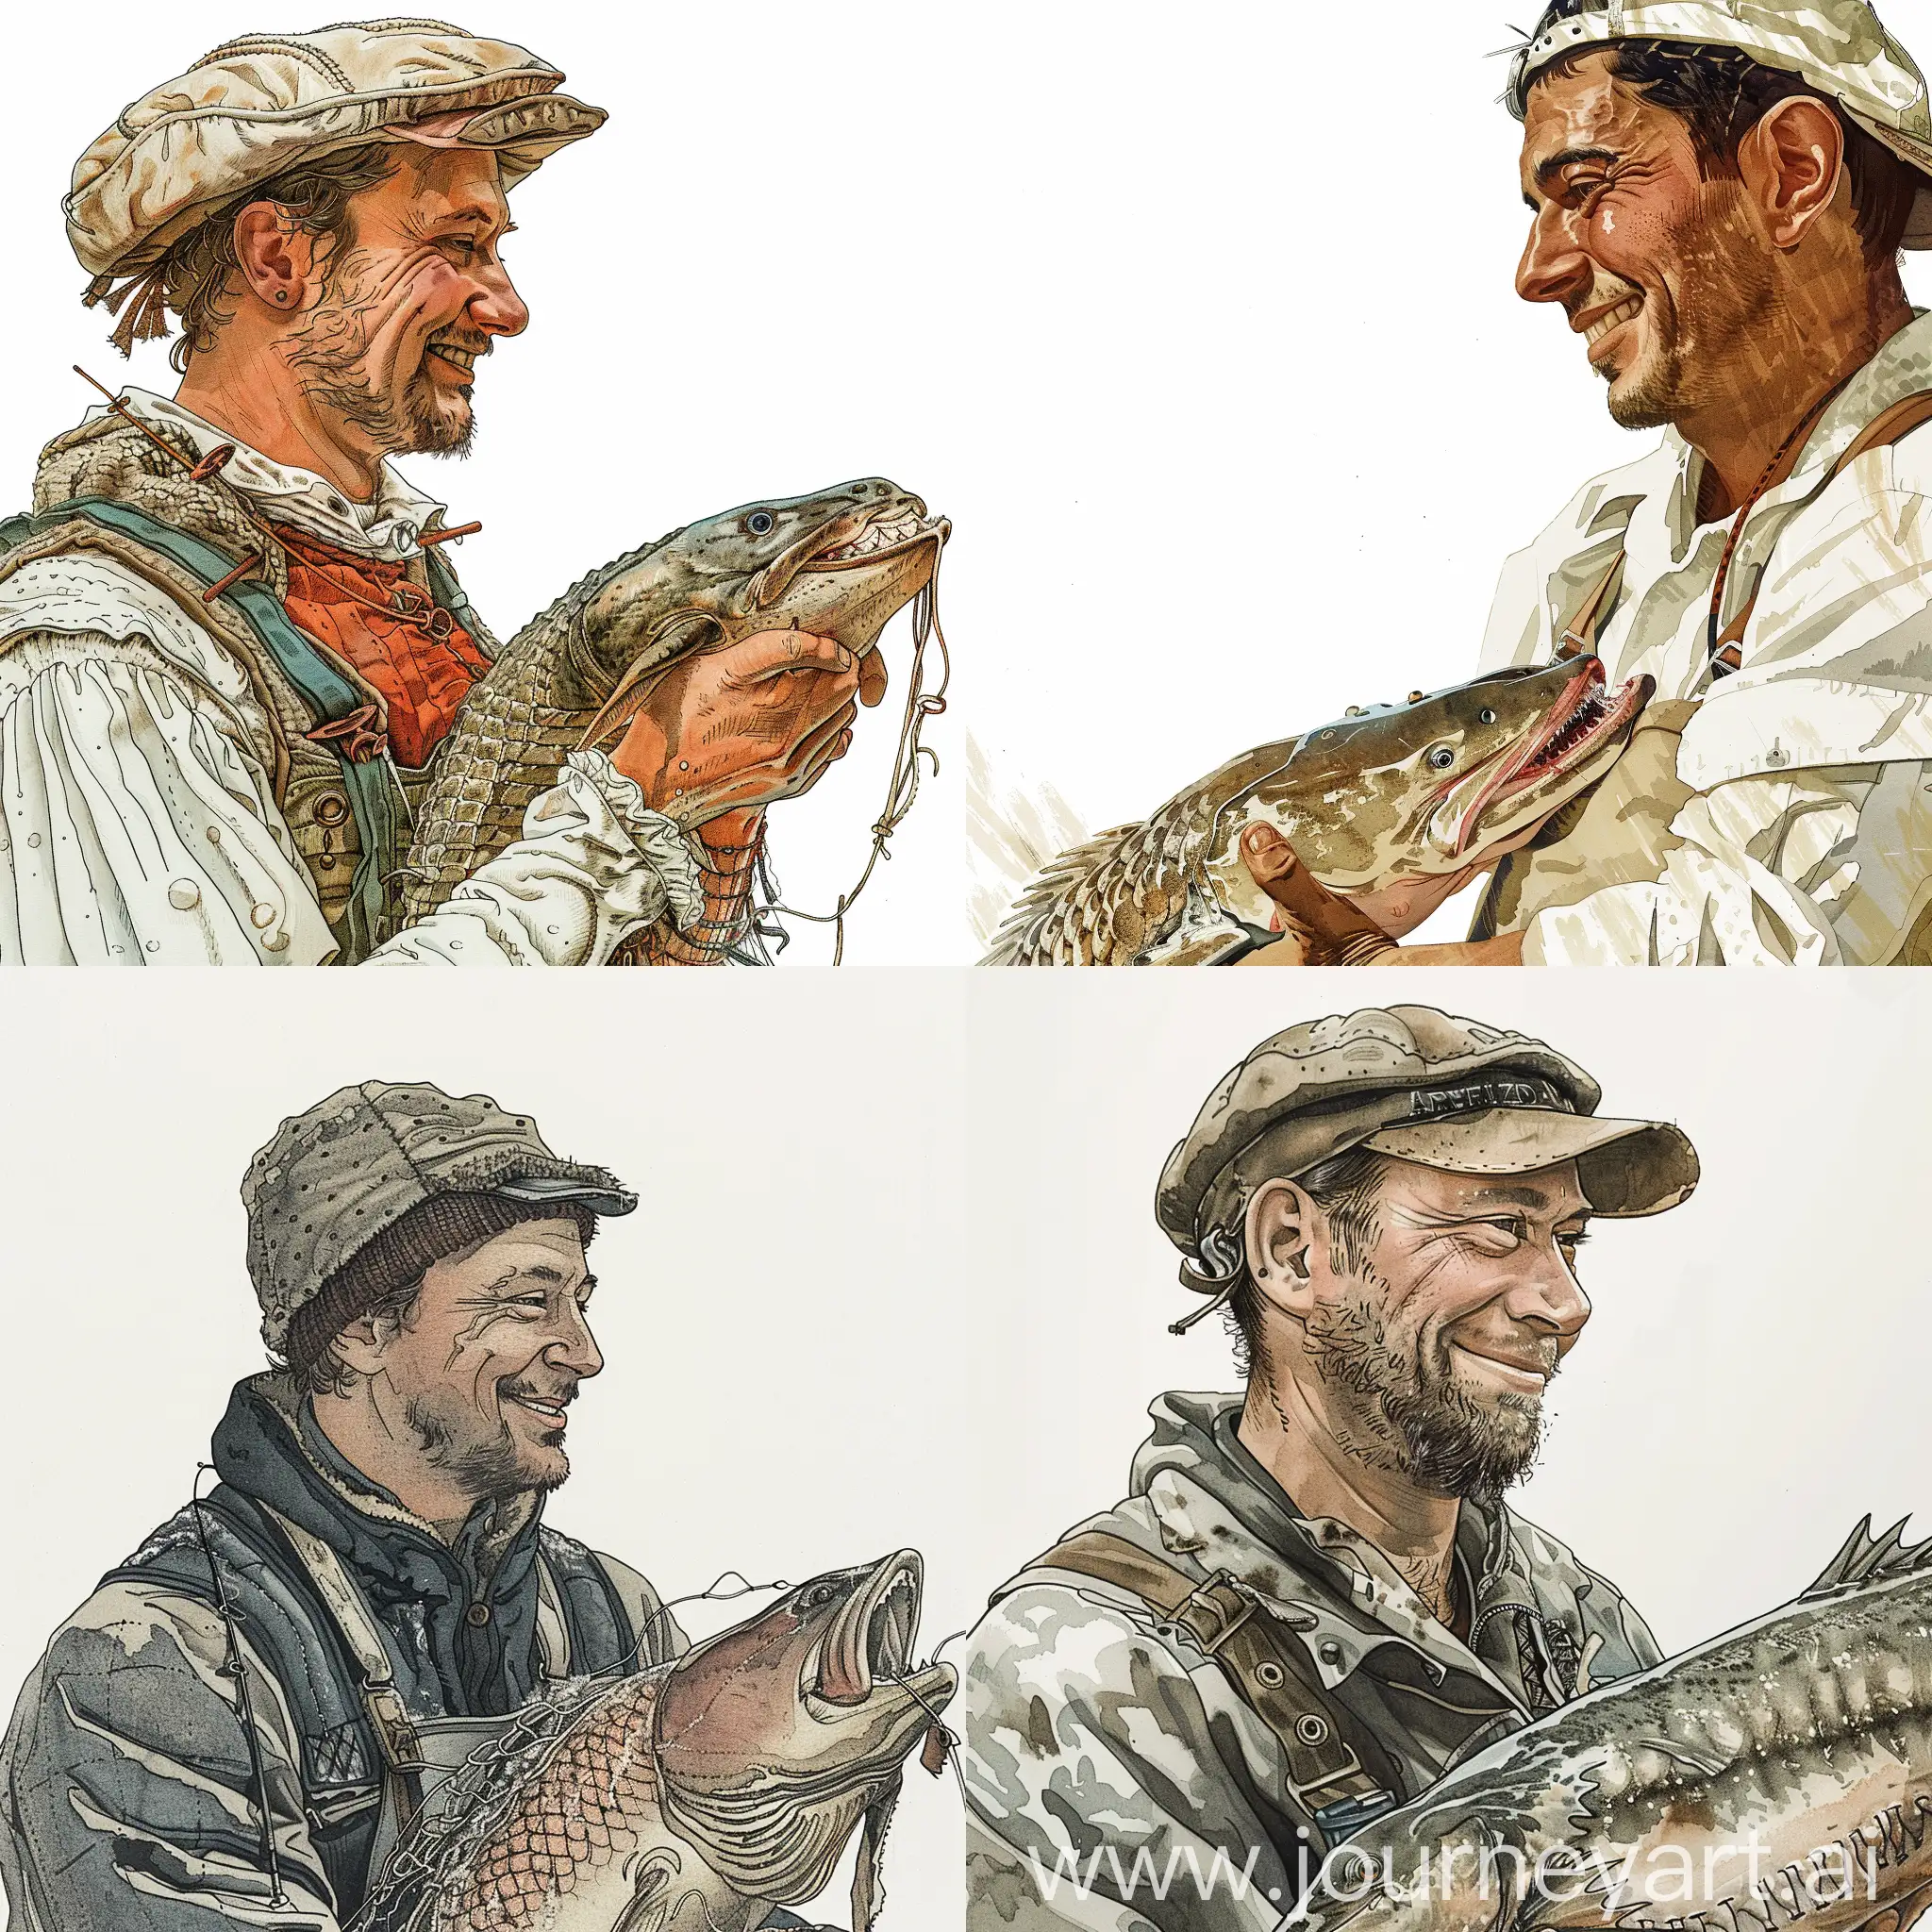 Man, smiling slightly, face in profile, in fishing clothes, lots of details, holding a sturgeon, white background, illustration, Gustav Robert Hegfeldt style